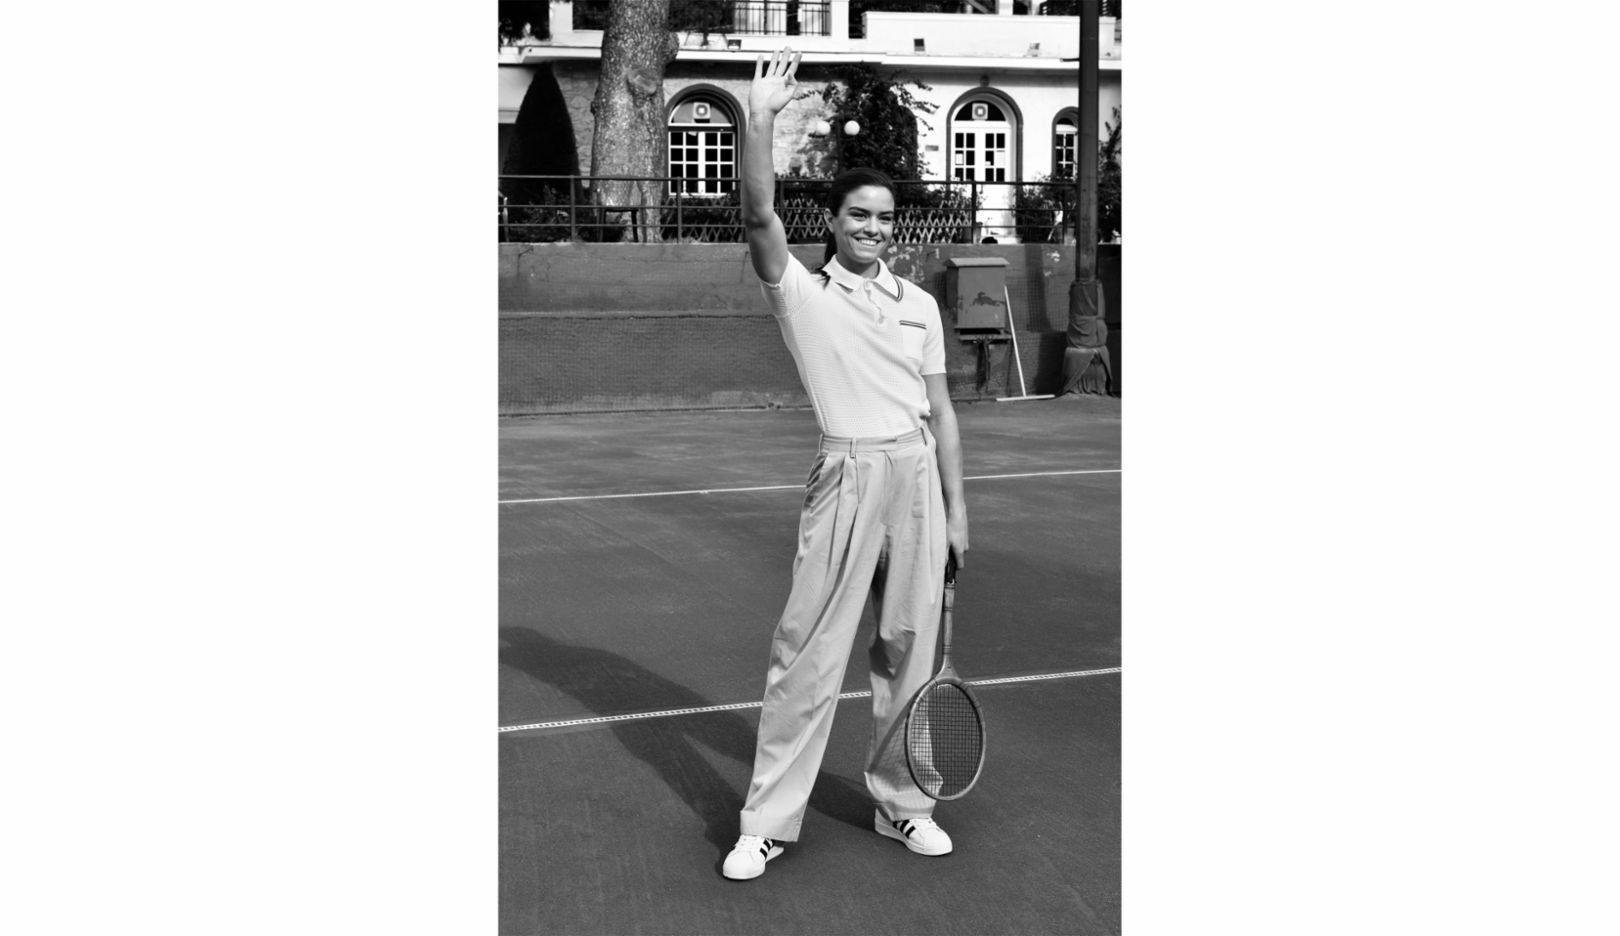 Maria Sakkari at the Athens Lawn Tennis Club. “The photo pays homage to the 1930s and 40s,” explains Radka Leitmeritz. “Maria grew up in Athens. Even her grandparents and mother played at the old tennis club, which is why I wanted to capture her in this environment and look.” 